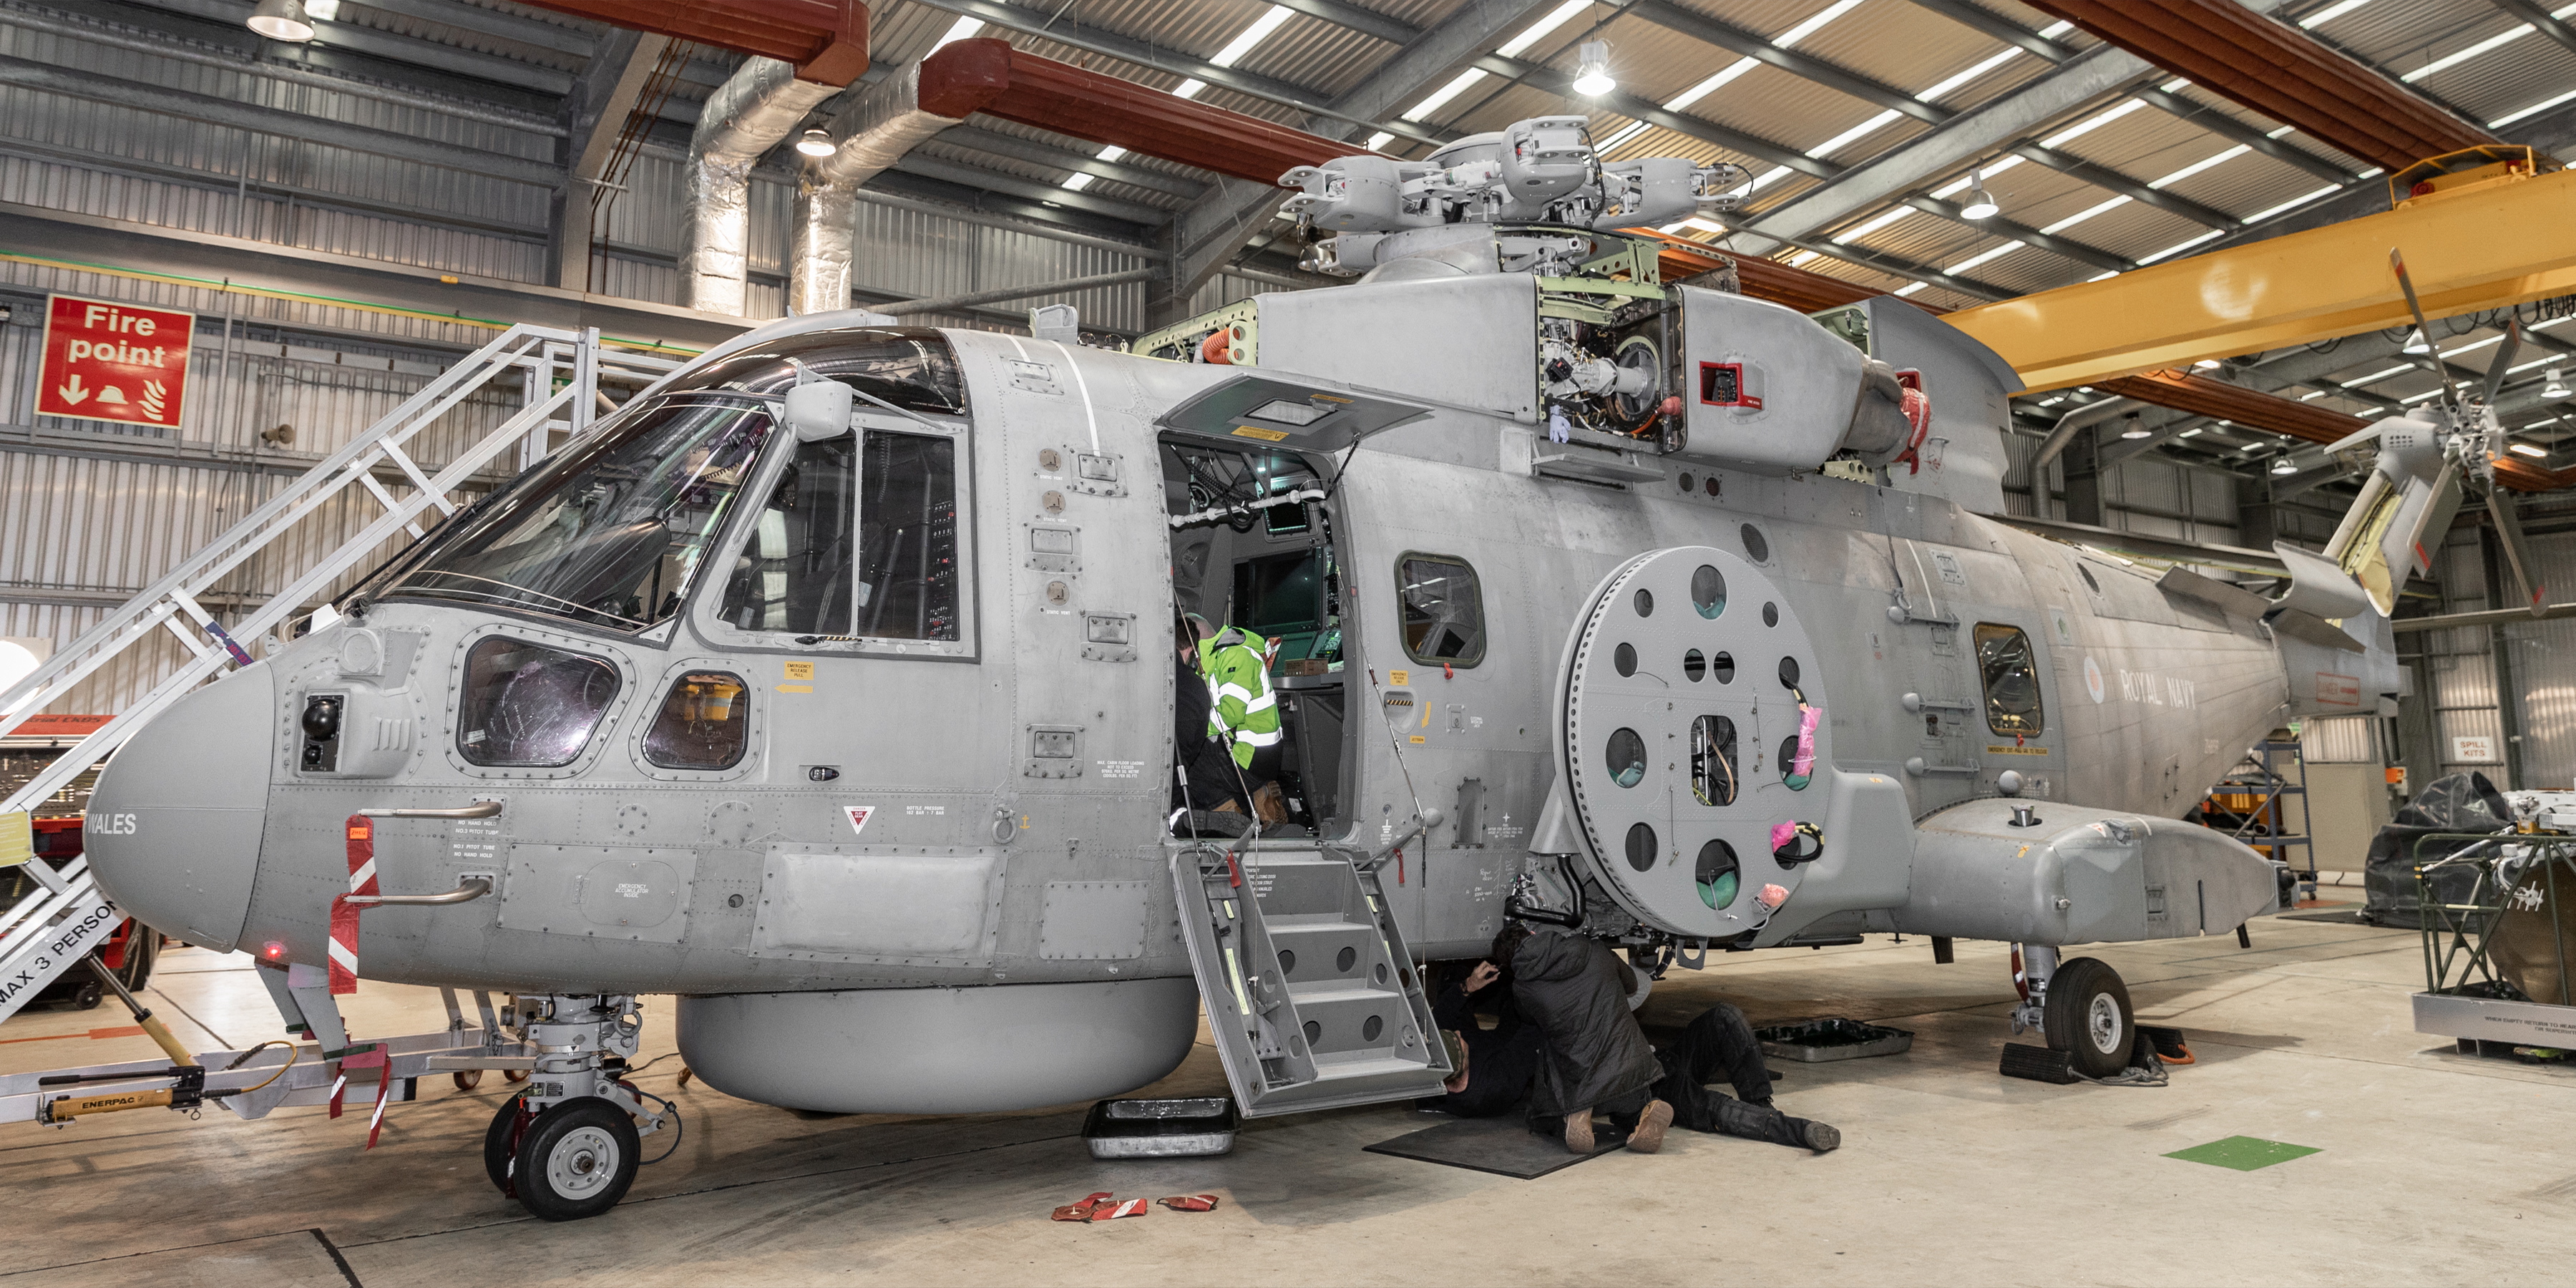 Royal Navy's Merlin "Crowsnest" Helicopter